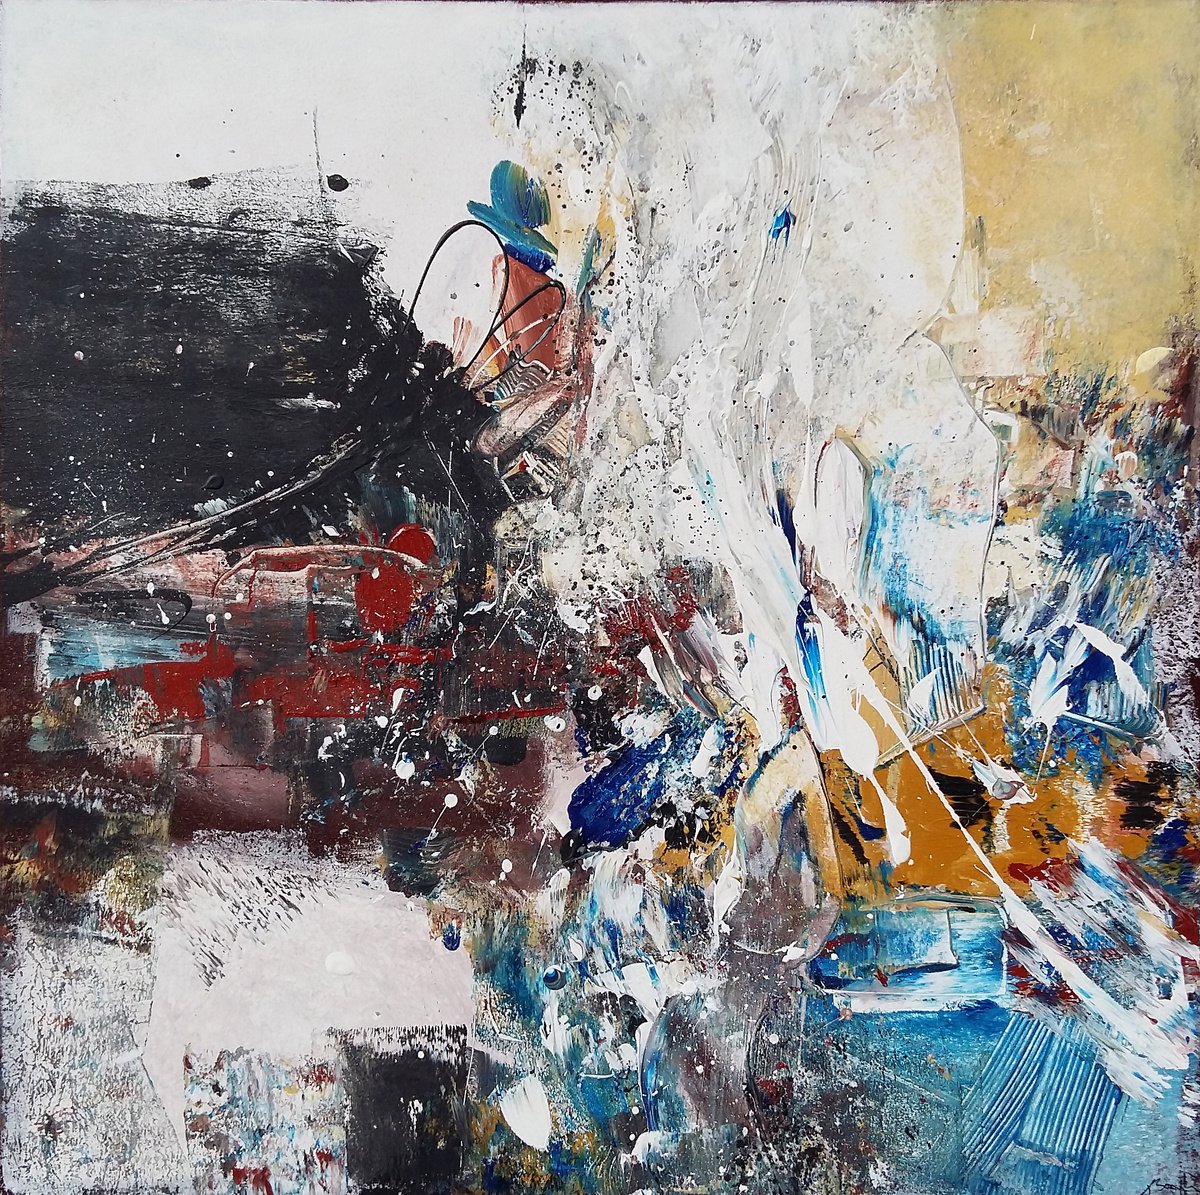 Abstract world II, 80x80 by Abbie